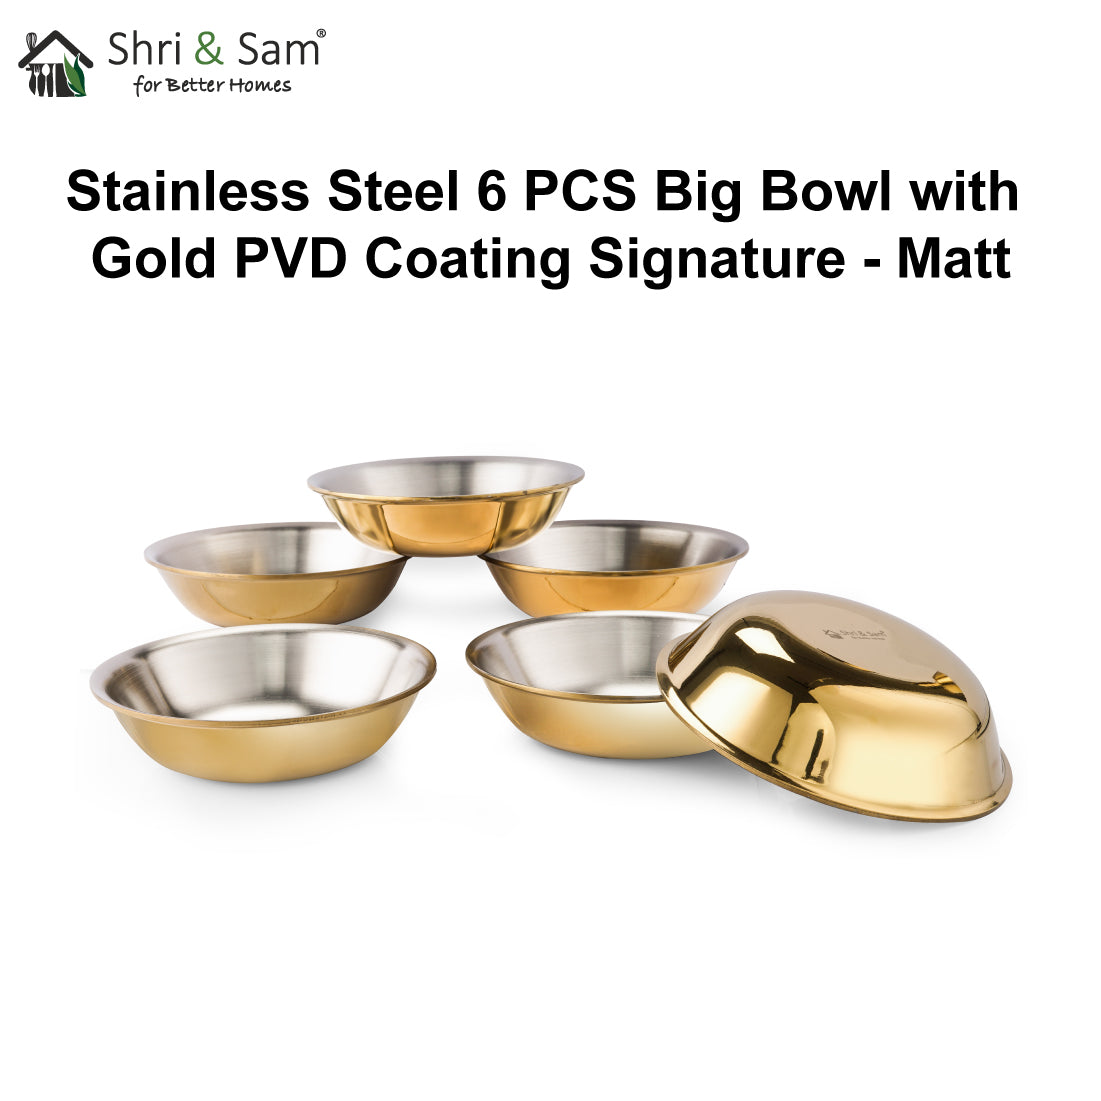 Stainless Steel 6 PCS Big Bowl with Gold PVD Coating Signature - Matt